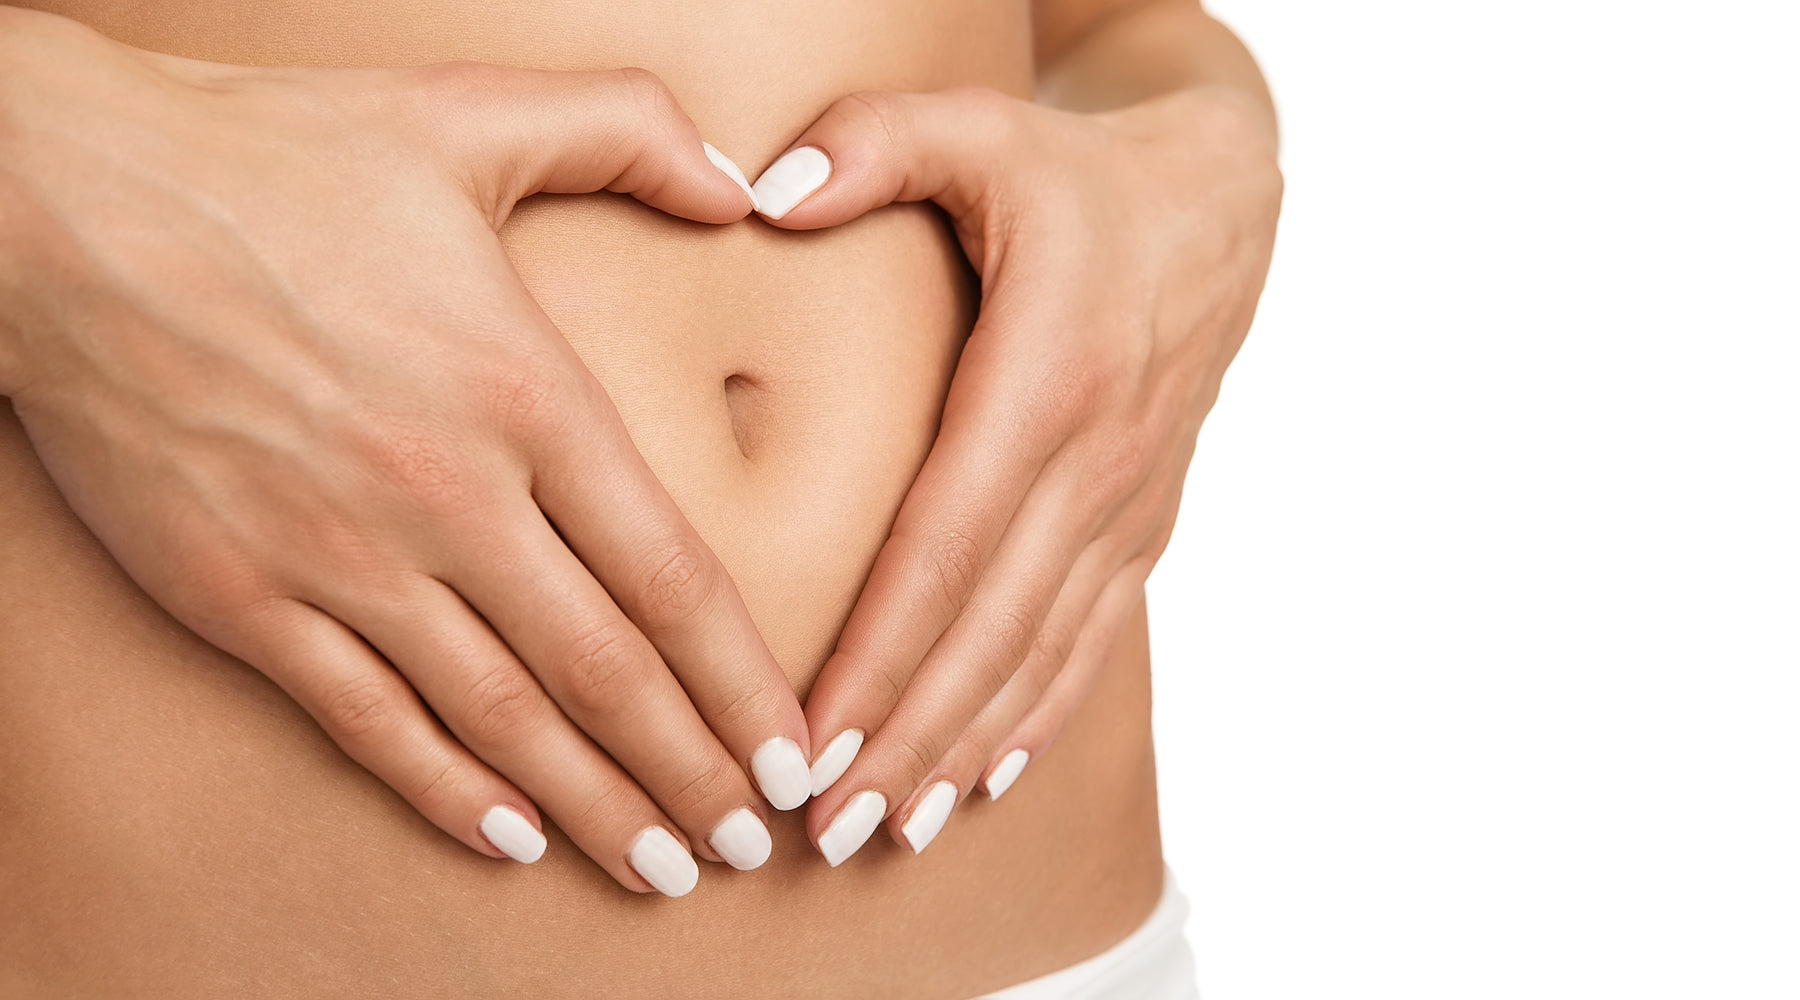 7 signs of digestive imbalance